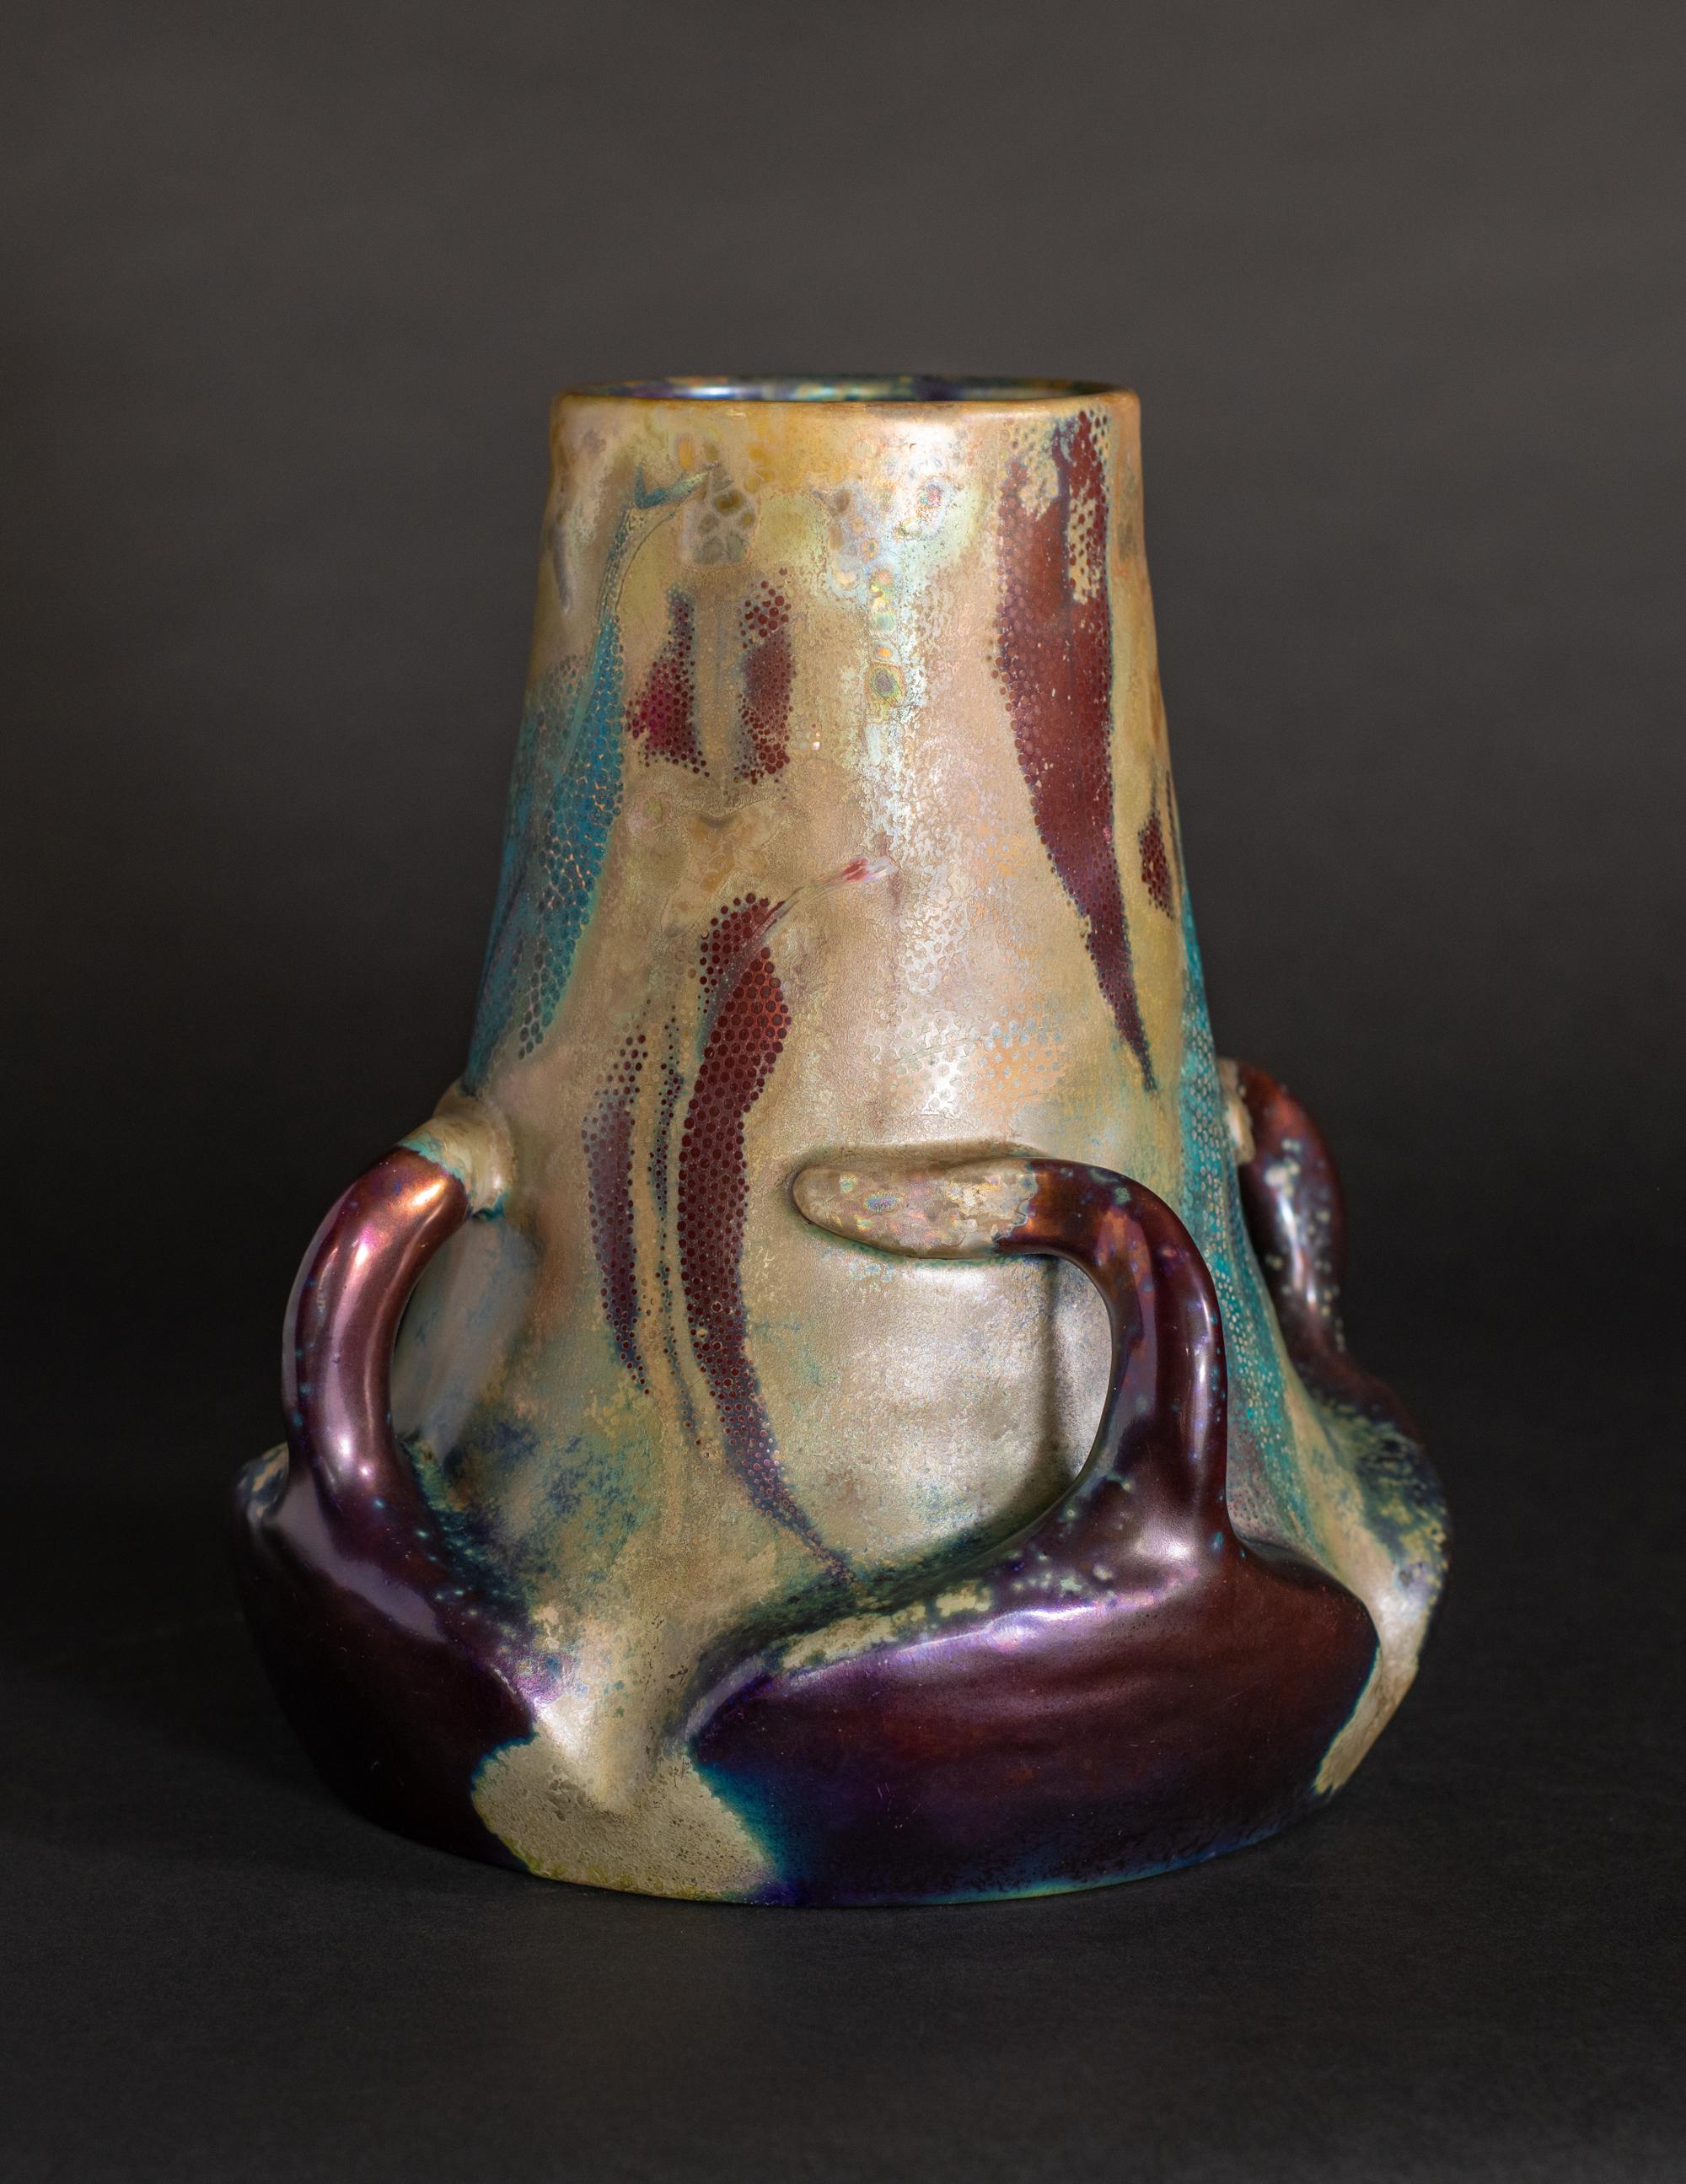 Signed Lucien Levy Dhurmer & Clement Massier.

An encounter with Massier’s luster-glazed ceramics is an embarkation on an acid-colored trip, the sort of exploration which inspires deep reflection and requires transparency. Clement Massier, an